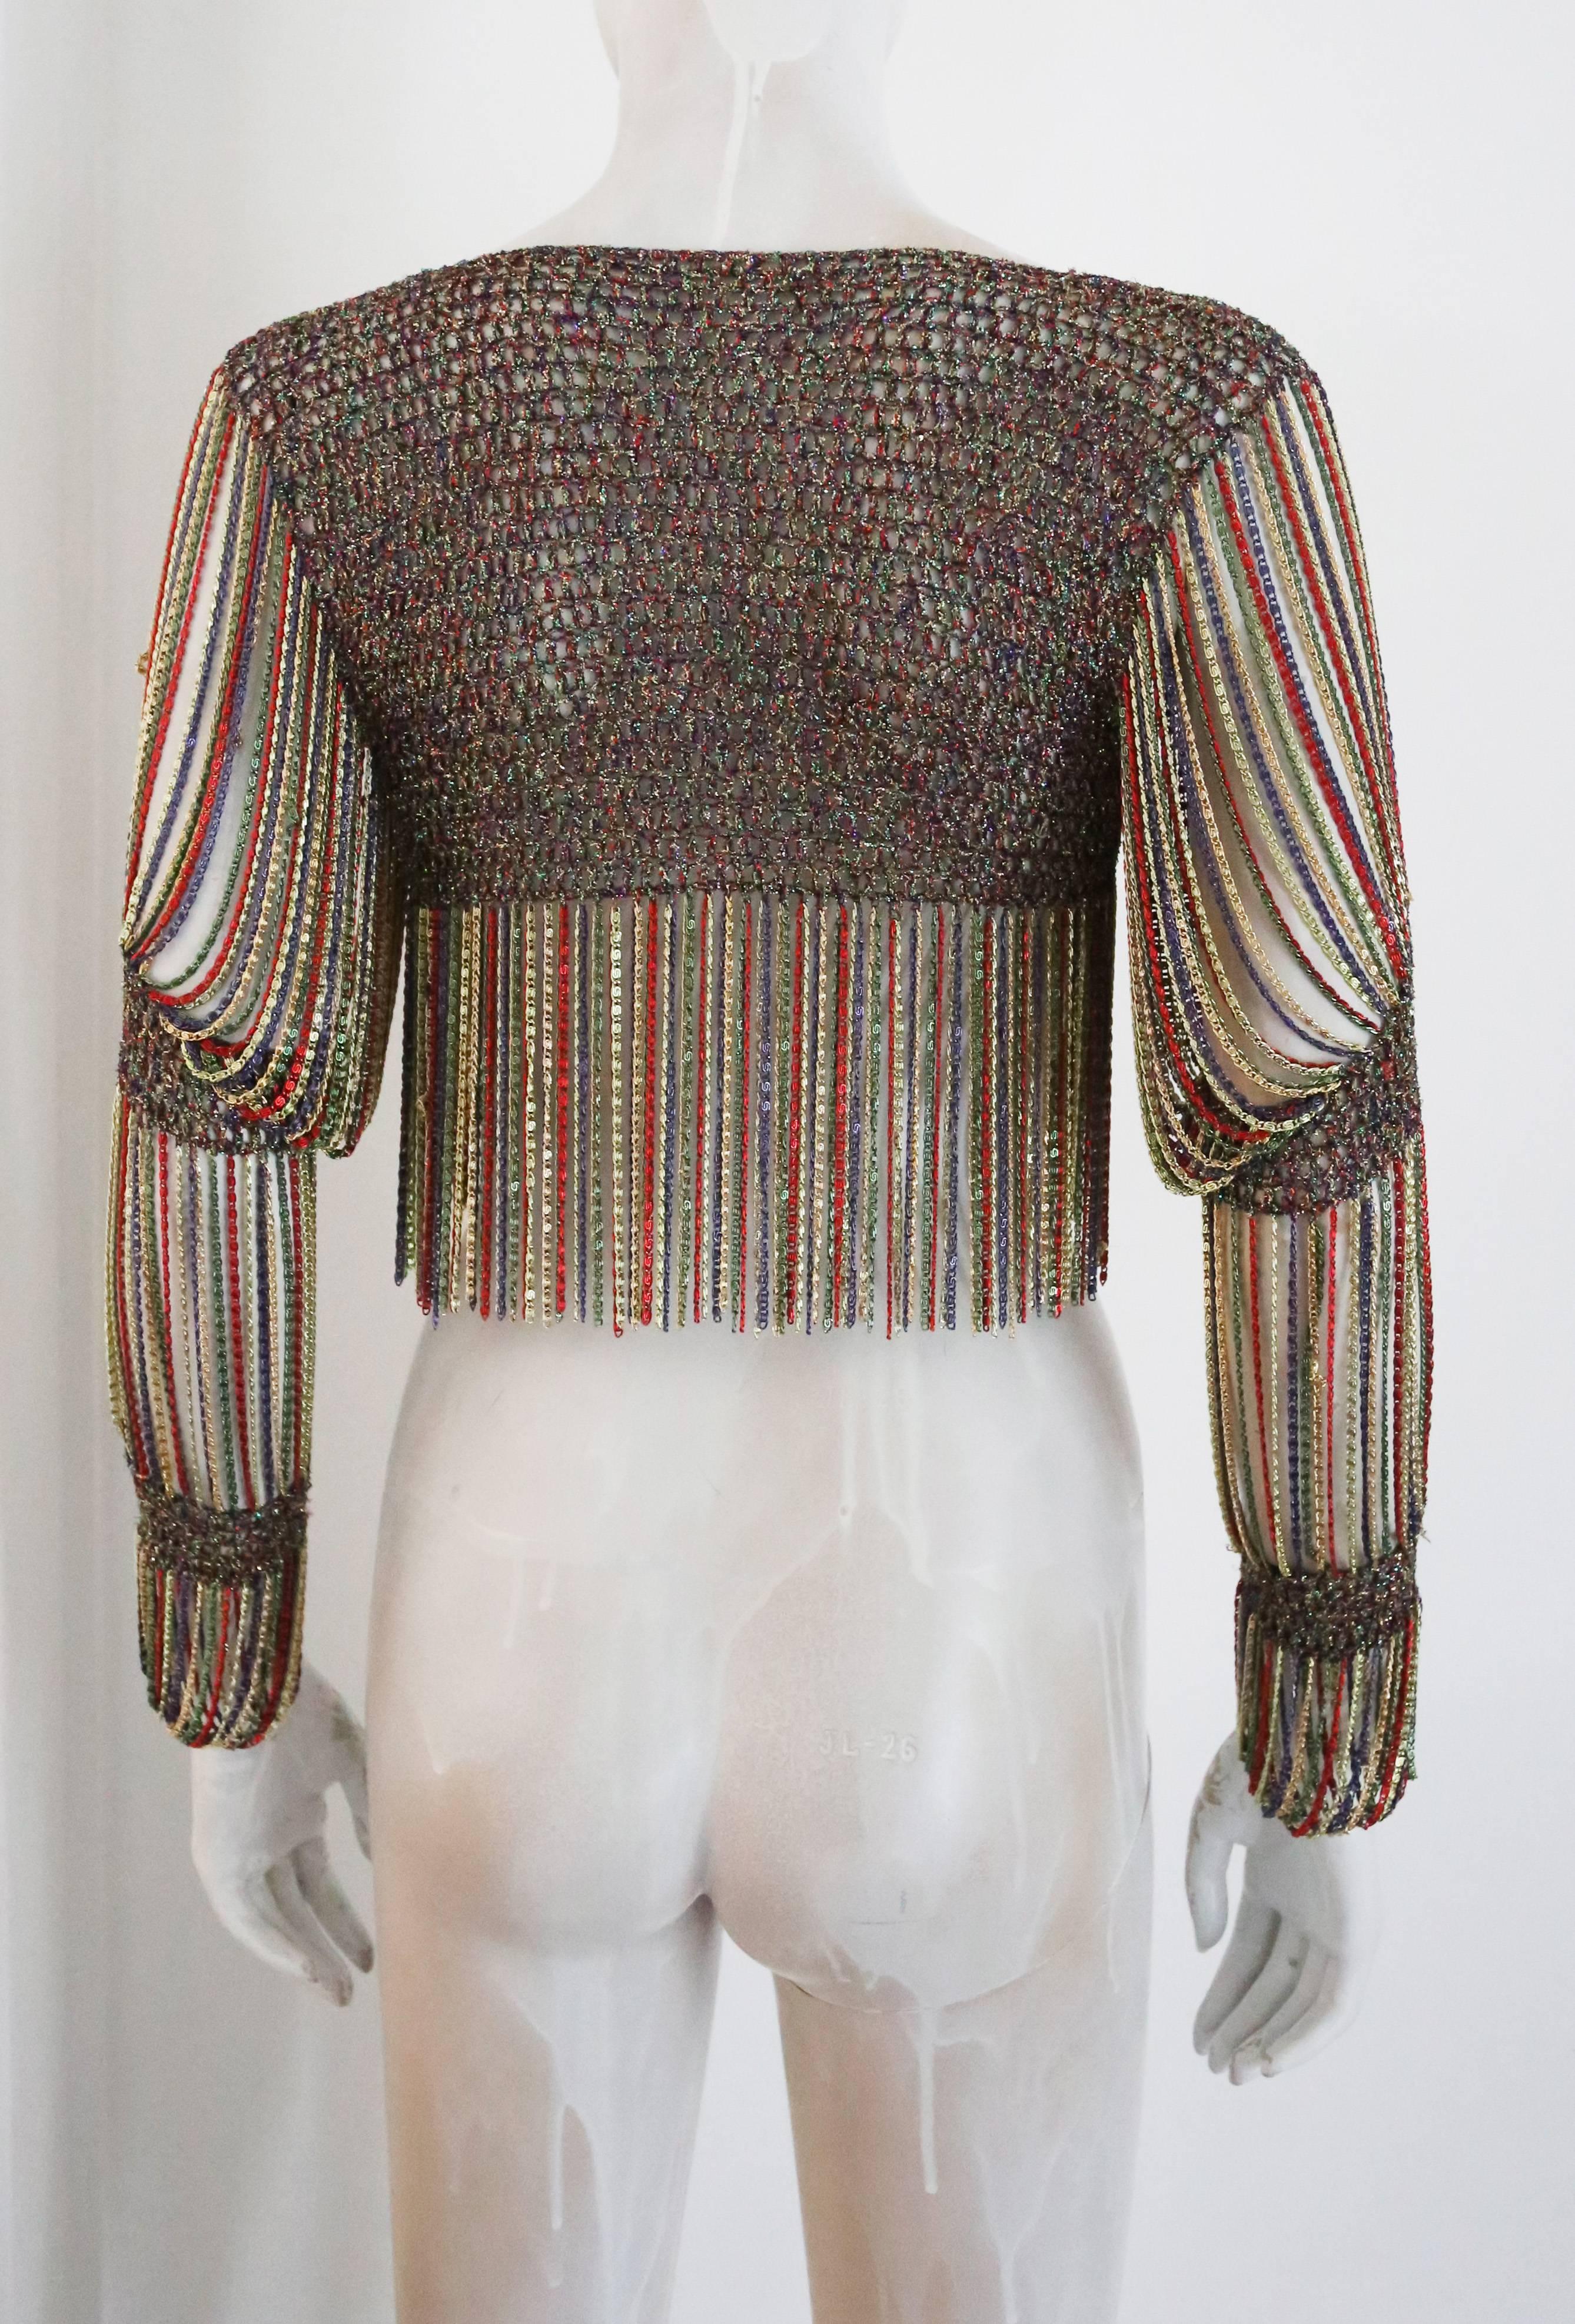 Brown Loris Azzaro knitted cropped cardigan with chain mail sleeves and trim, c. 1970s